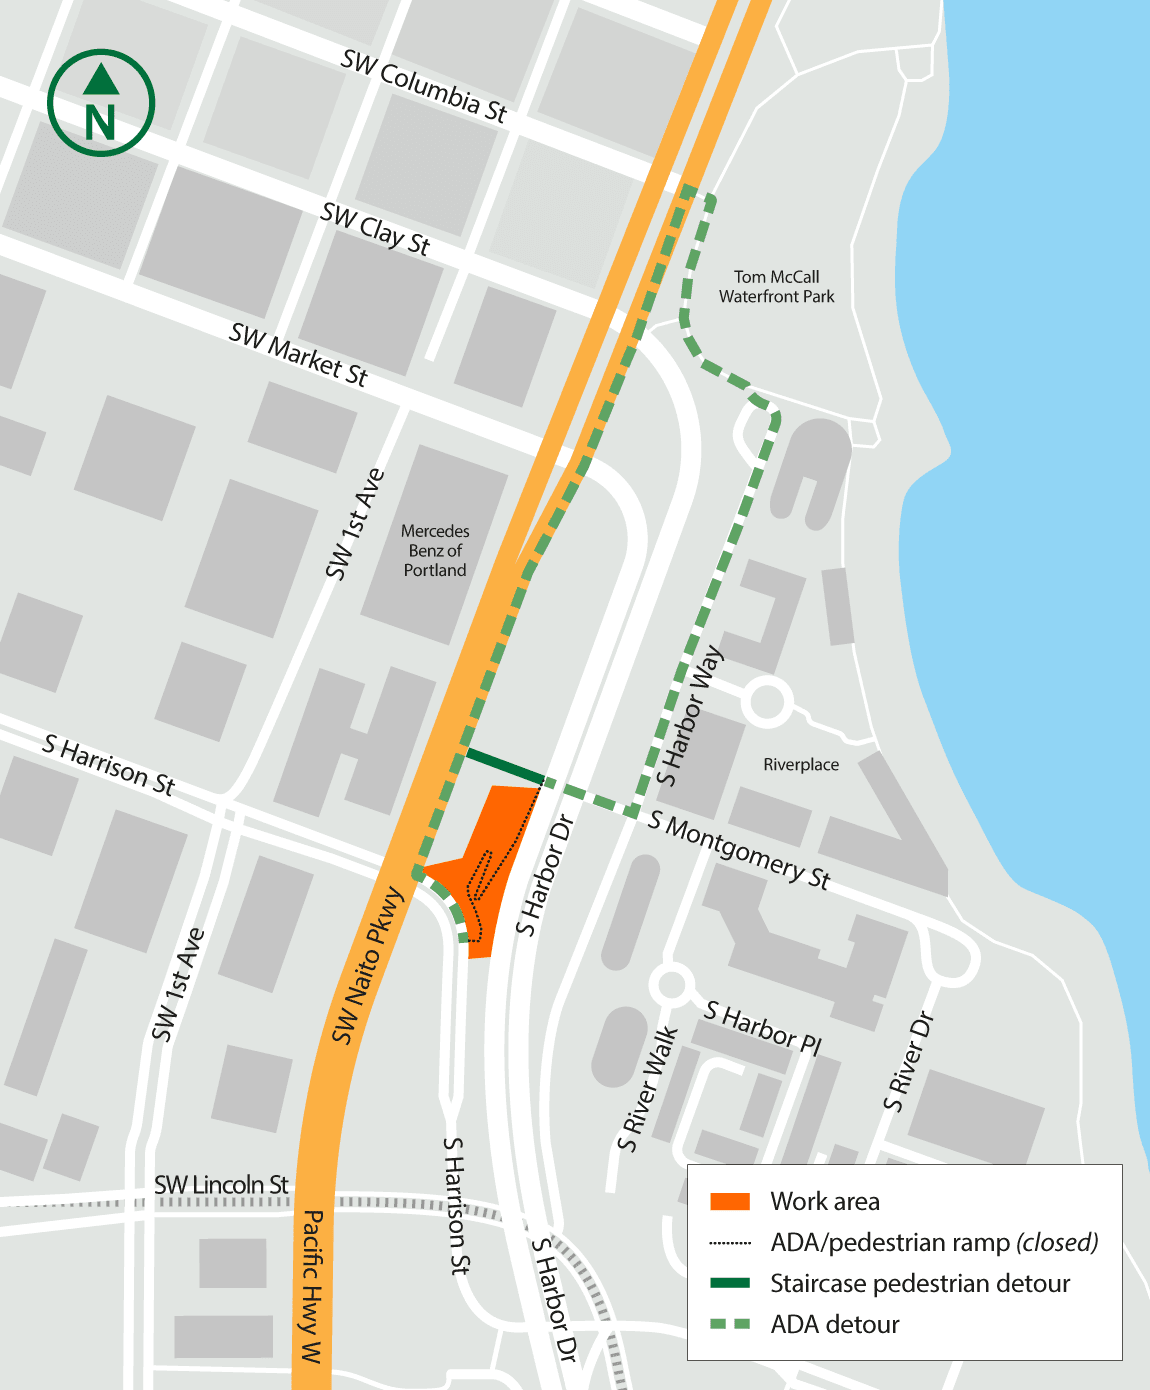 map of the work area, the closed ADA/pedestrian ramp, the staircase pedestrian detour, and the ADA detour which will require people to cross SW Naito Parkway at SW Harrison Street. 